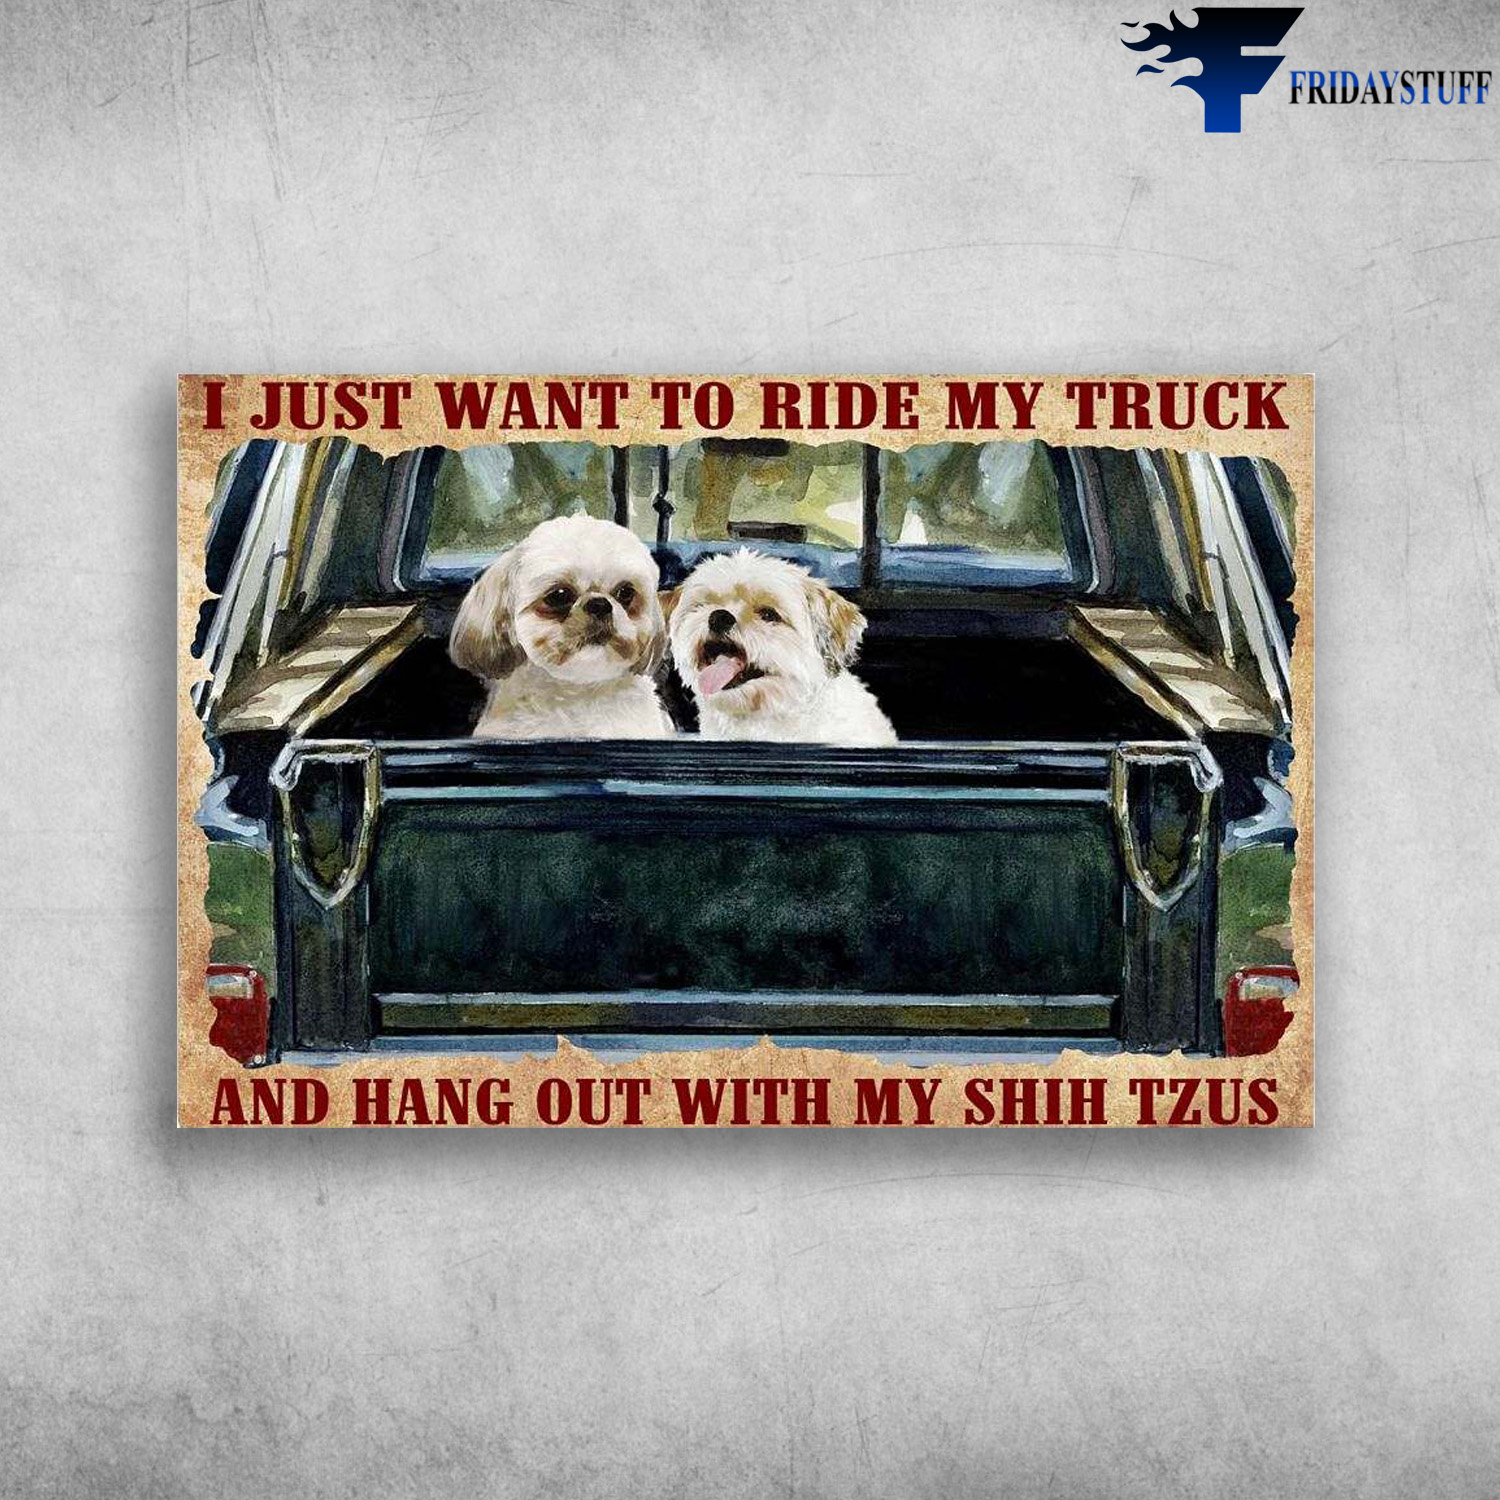 Shih Tzu Truck - I Just Want To Ride My Truck, And Hang Out With My Shih Tzus